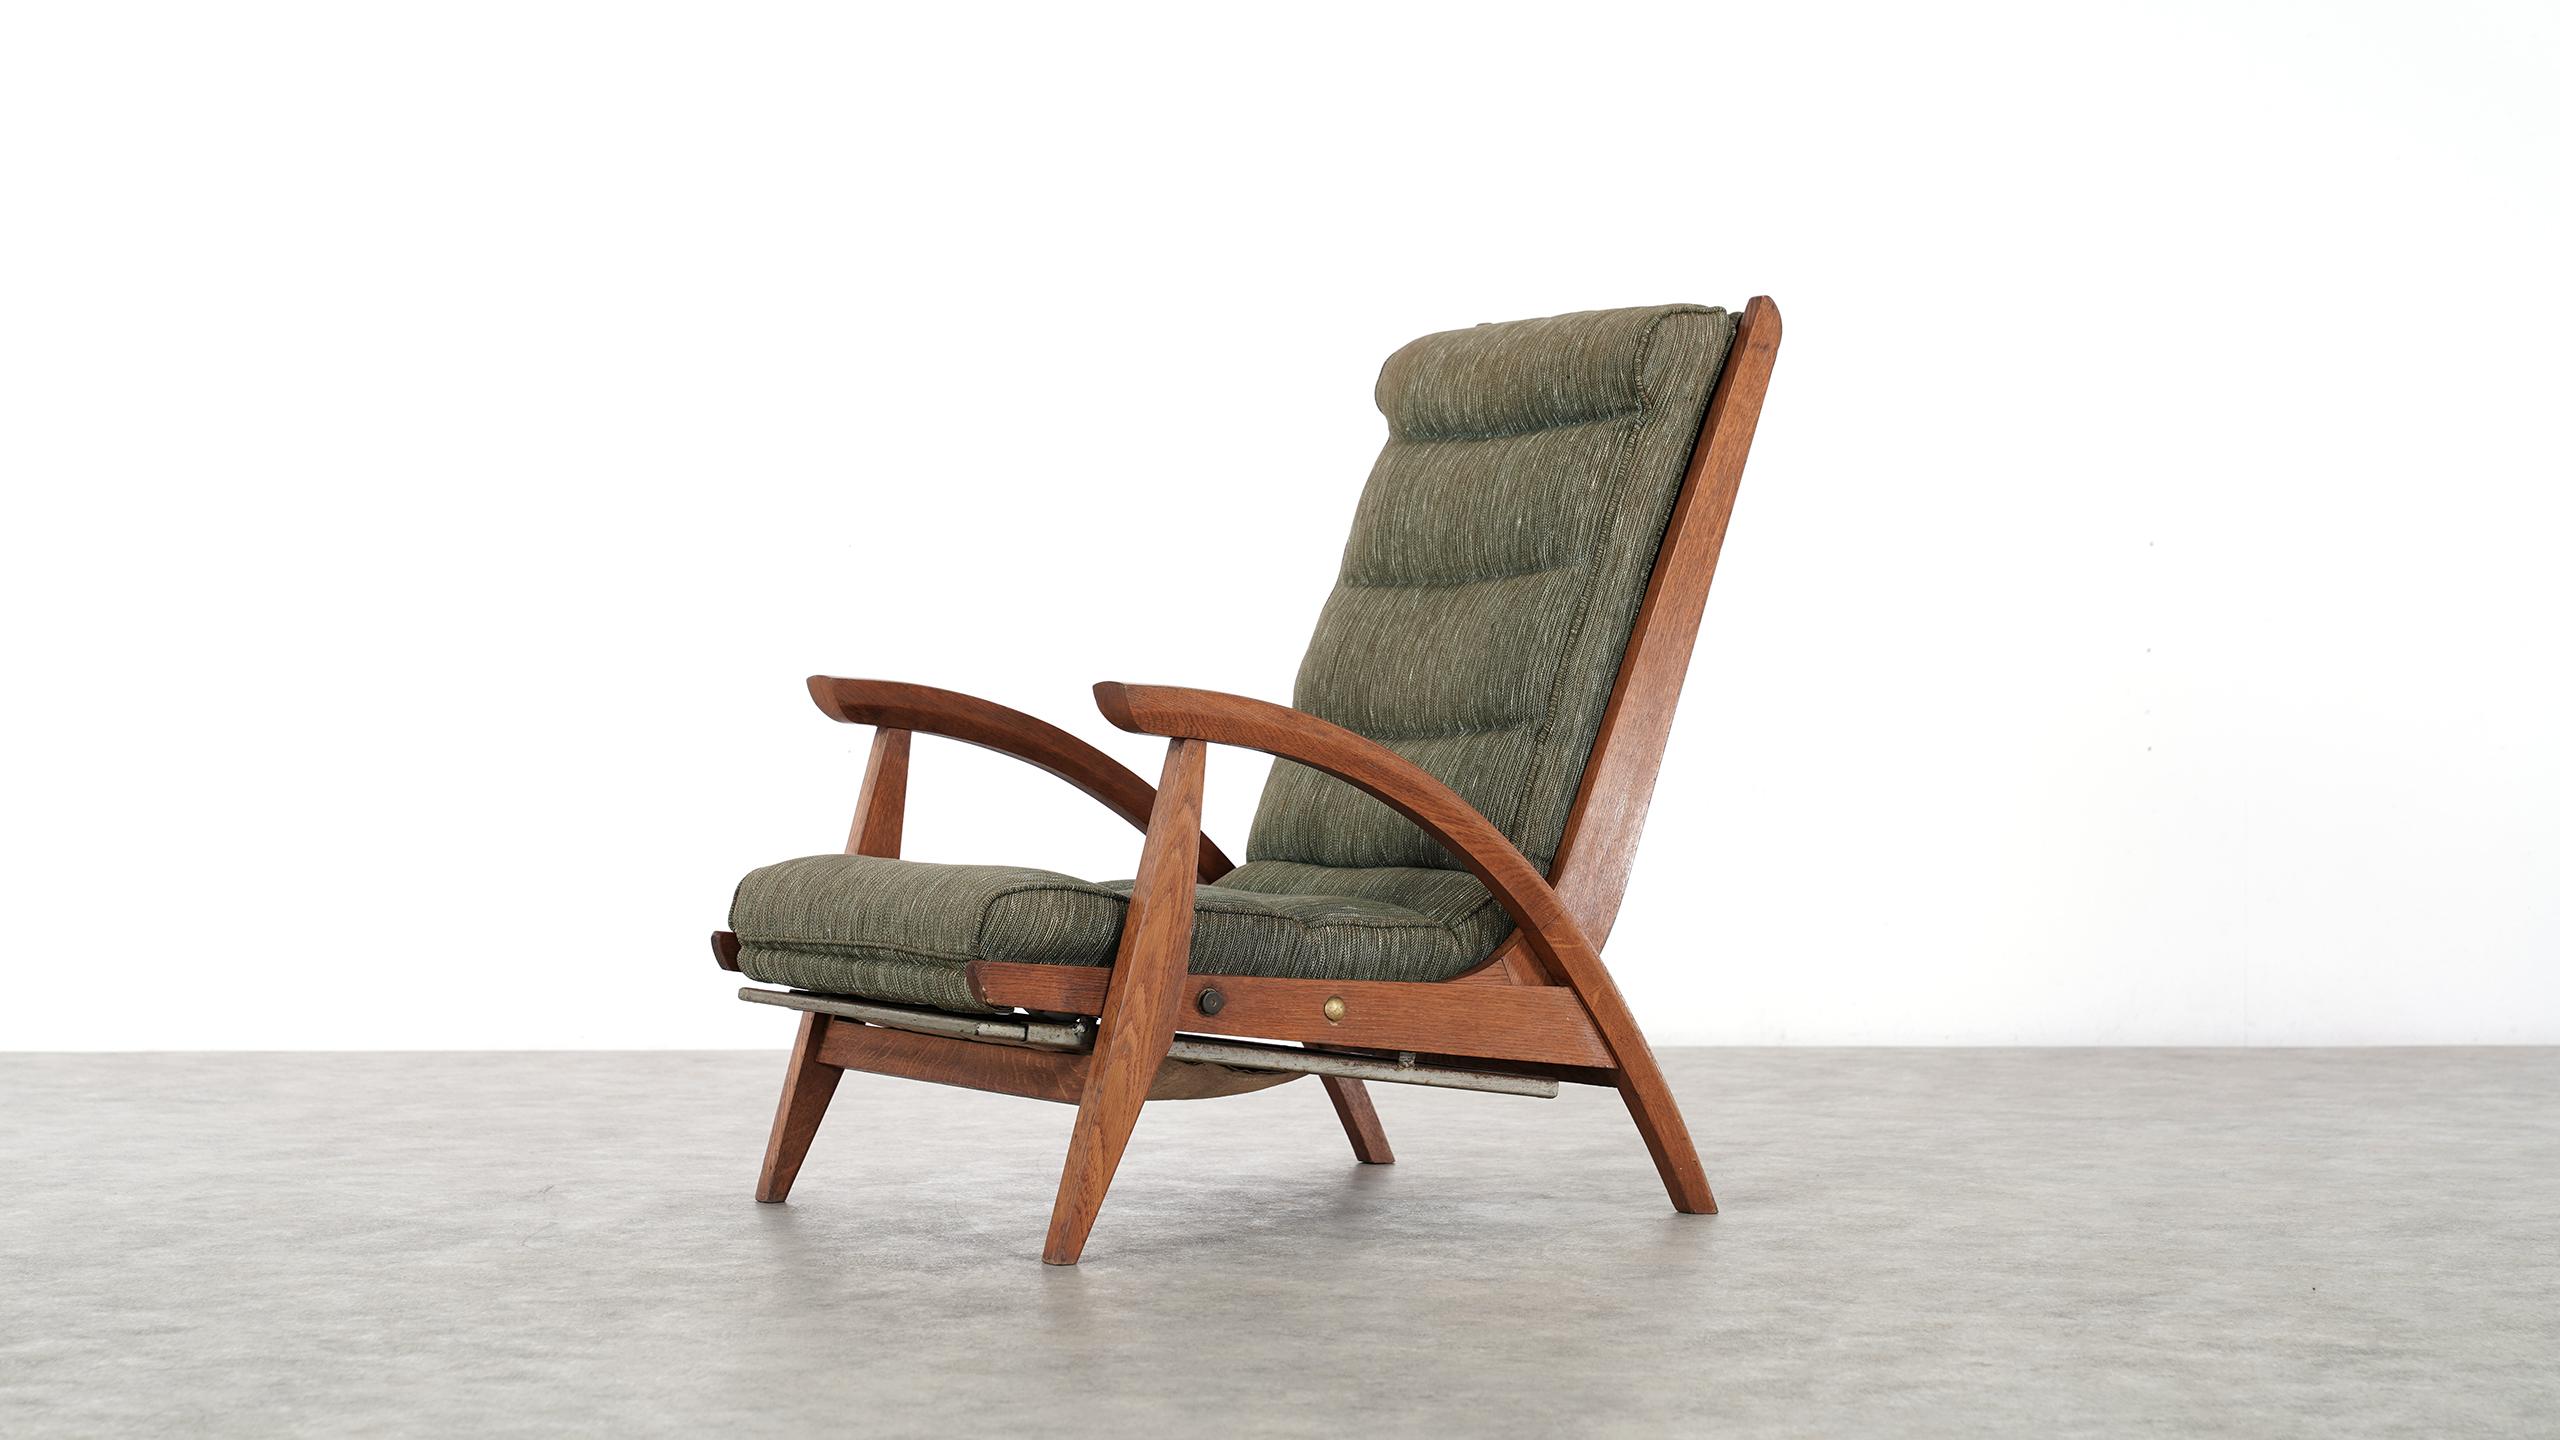 French Guy Besnard FS 134 Reclining Lounge Chair, 1954 for Free Span, France Prouvé